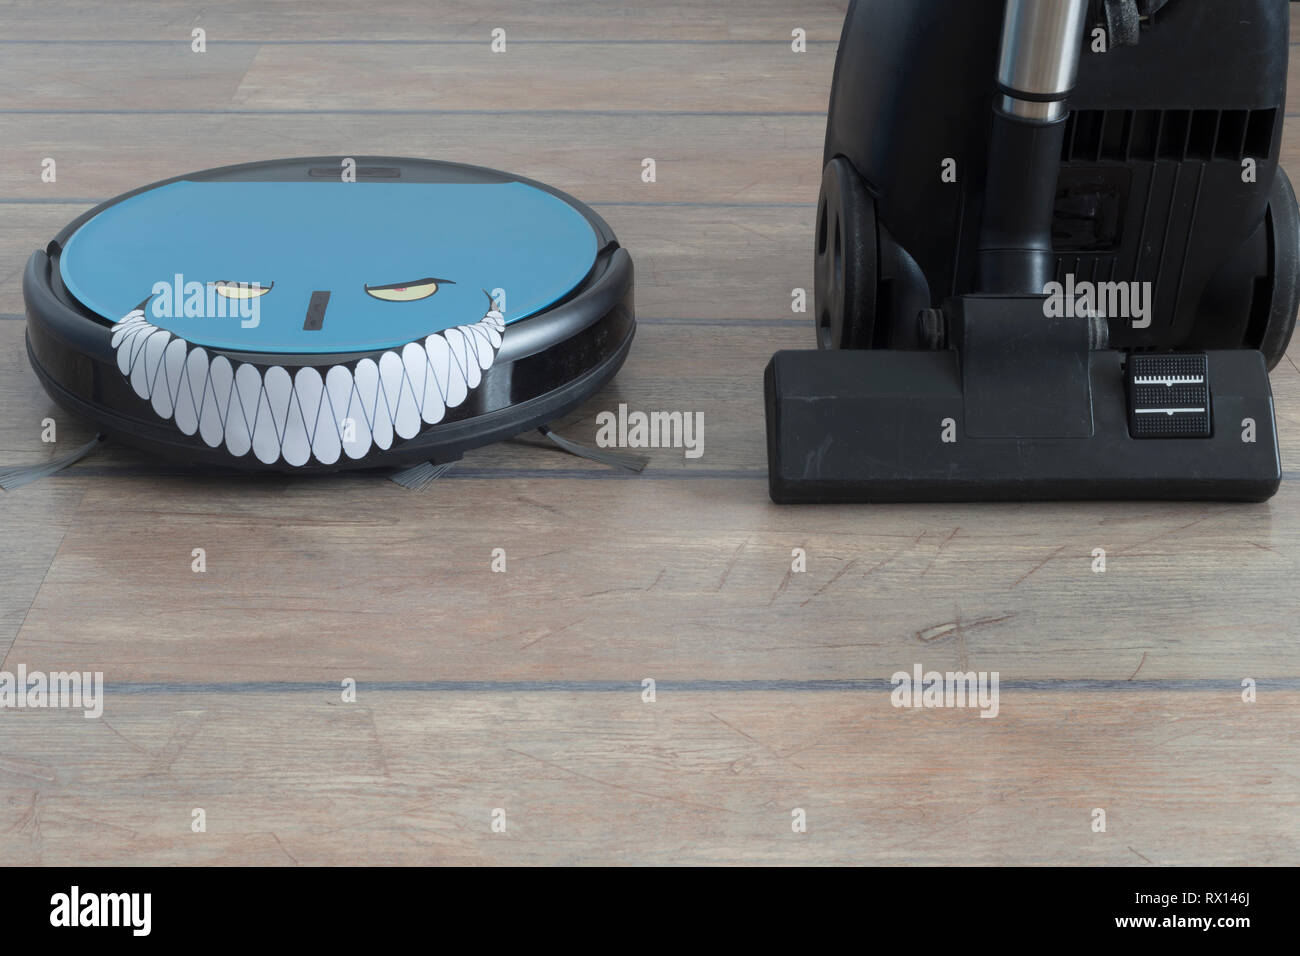 Robot Vacuum Cleaner With Evil Eyes And Grin And Regular Vacuum